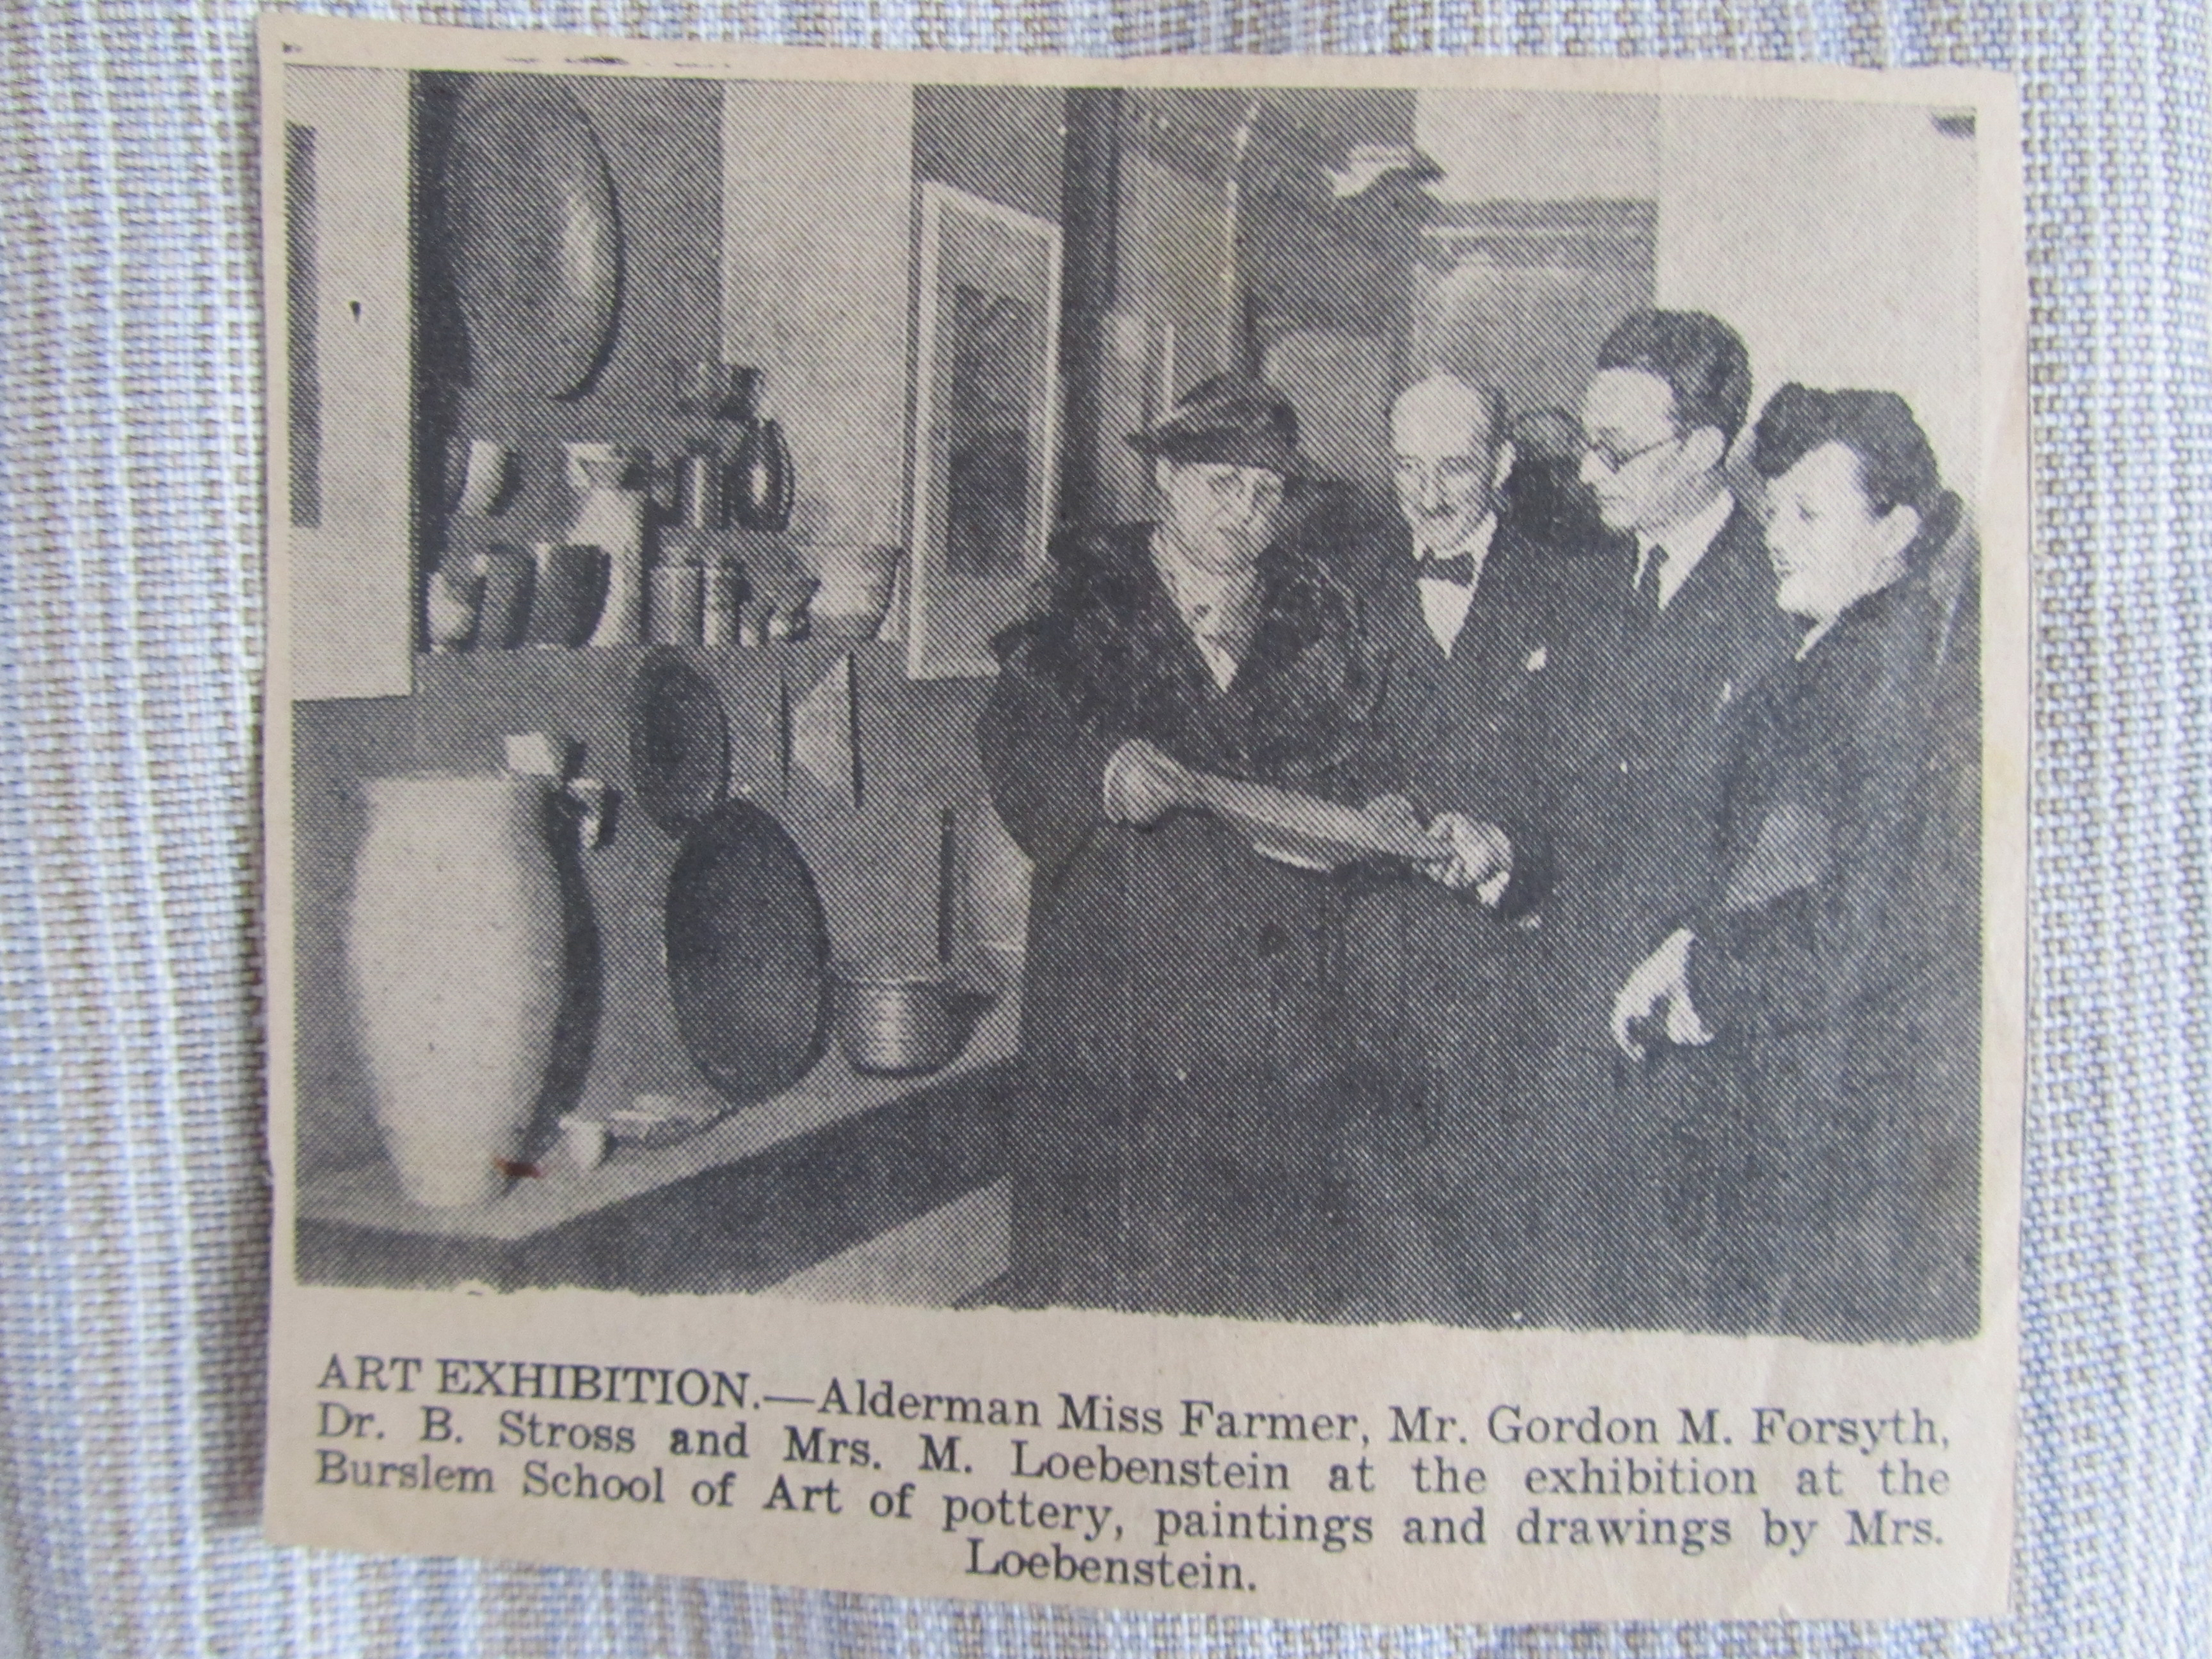 Snapshot of a newspaper clipping of Grete Marks (then Margret Loebenstein)'s exhibition at England's Burslem School of Art, 1936. Collection of Dr. Frances Marks. Photo by the author.